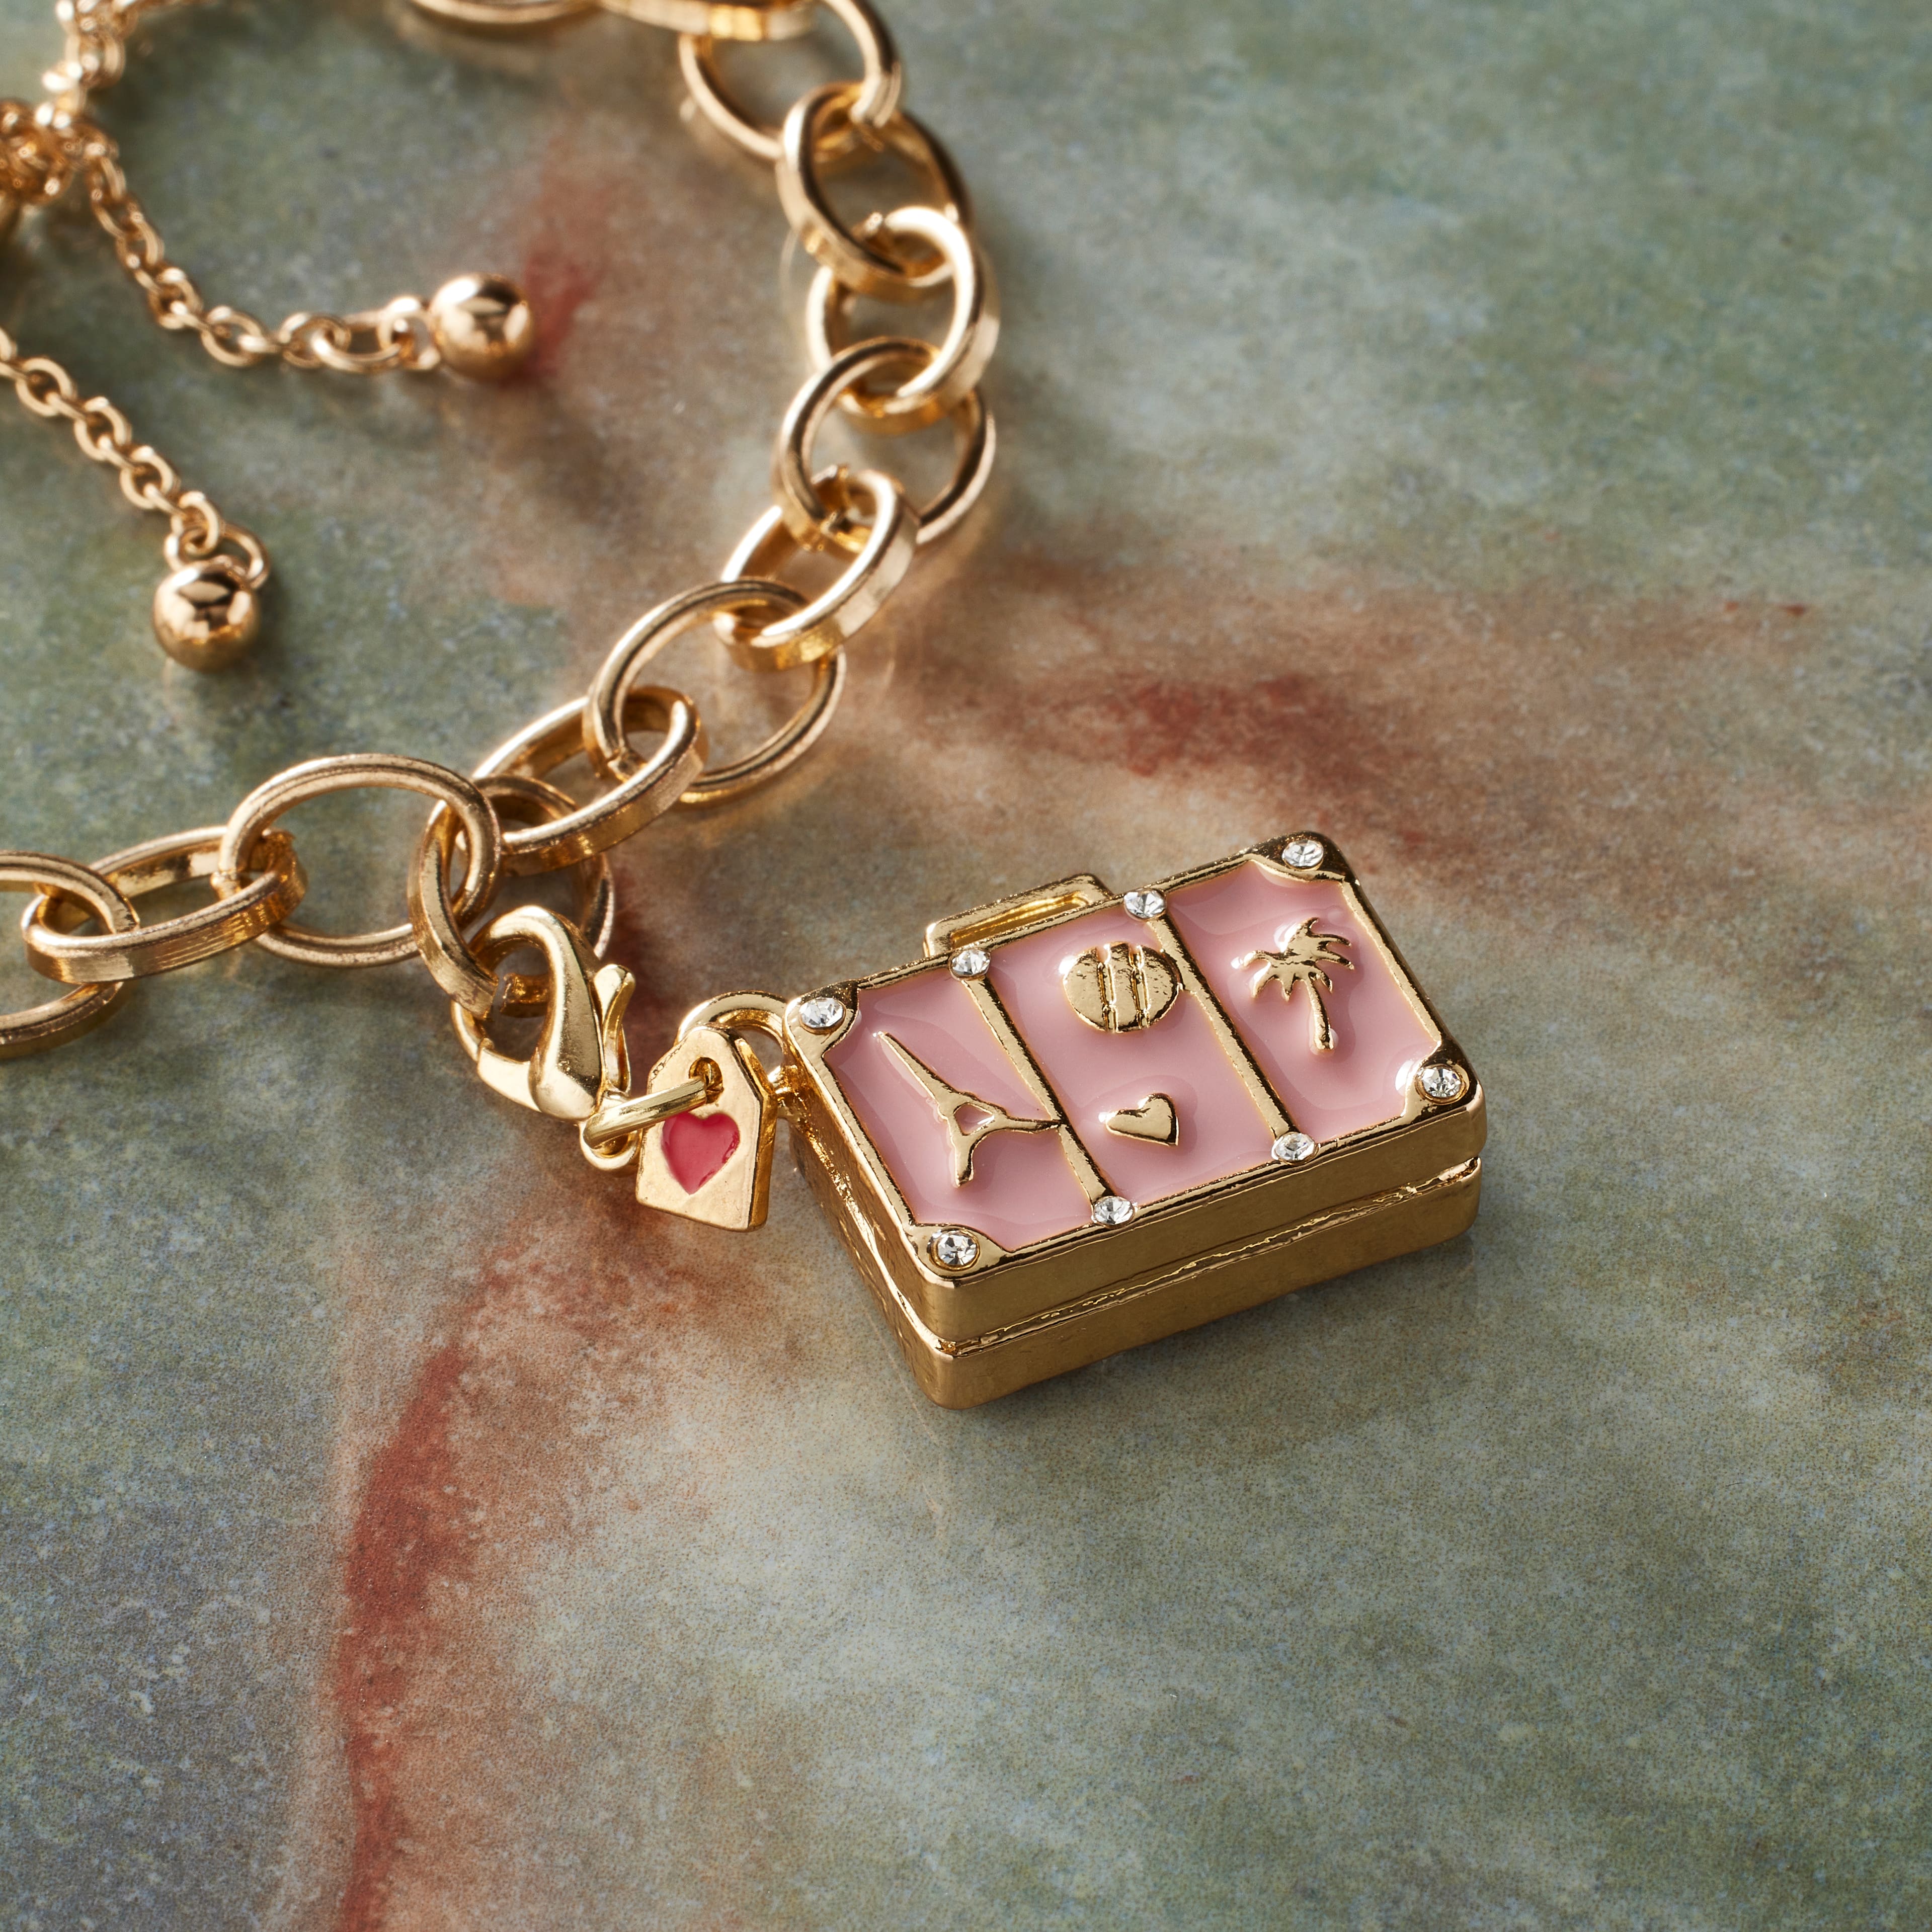 Pink Suitcase Charm by Bead Landing&#x2122;